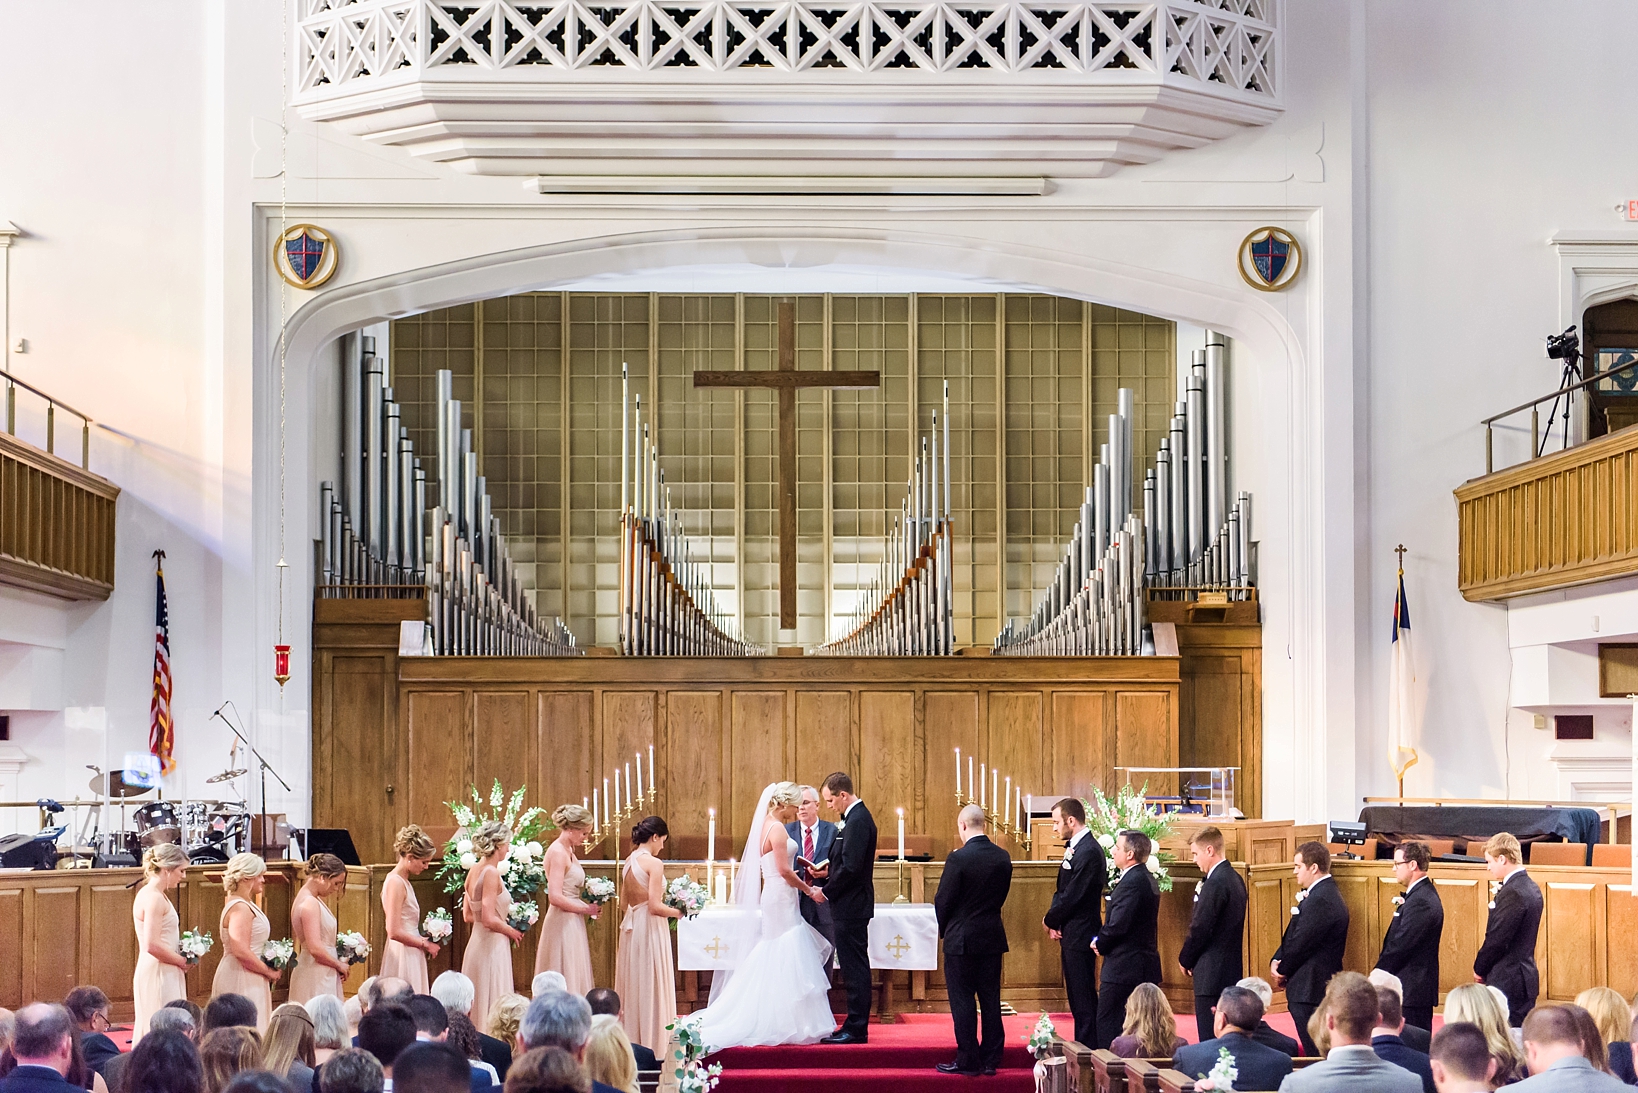 The Bridal Party on the altar at the First United Methodist Church in St. Petersburg, FL